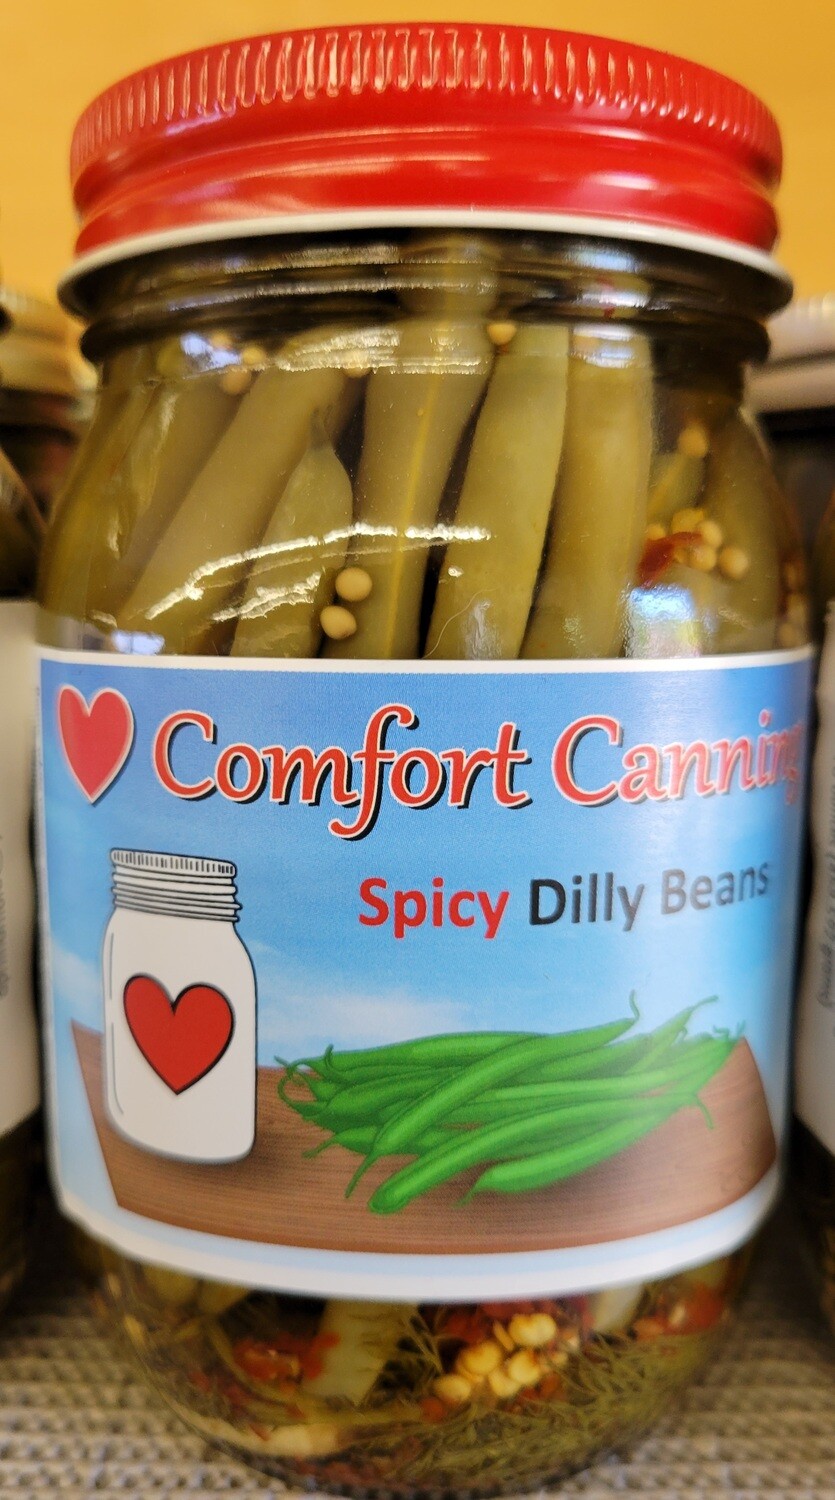 Comfort Canning - Spicy Dilly Beans